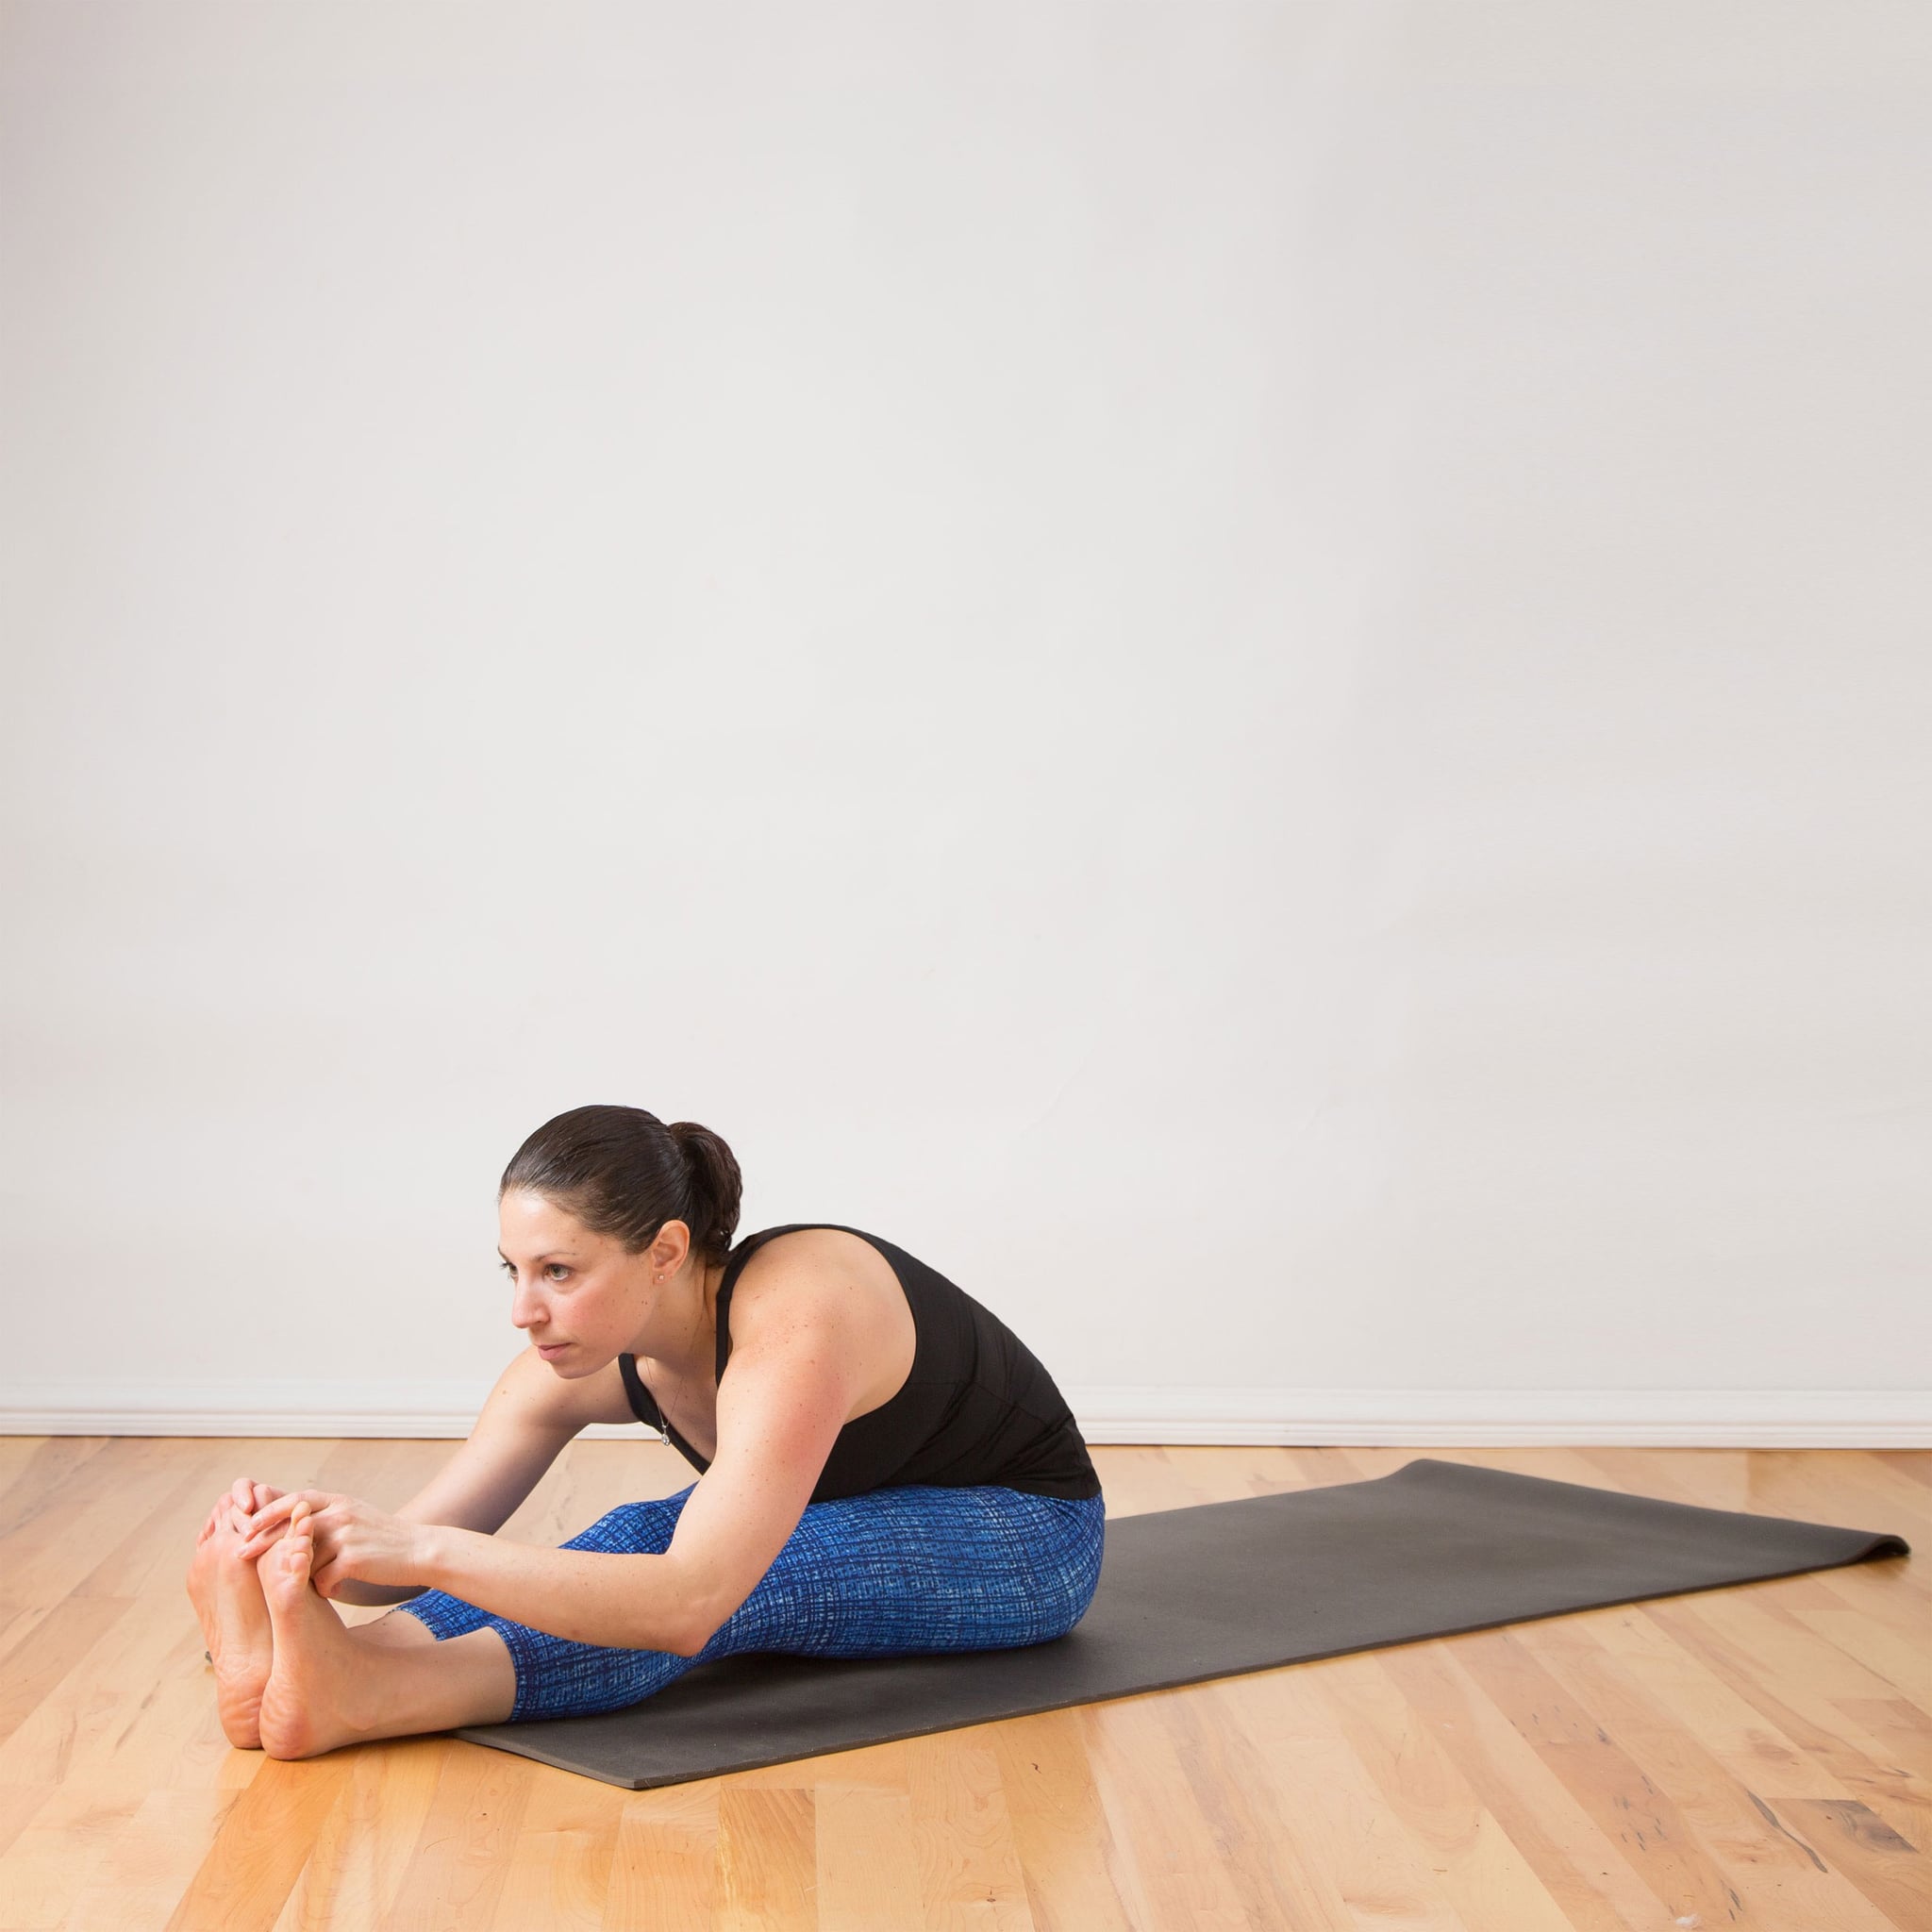 Five Ways To Deepen Forward Folds In Yoga | Mindful Movement + Creative Arts